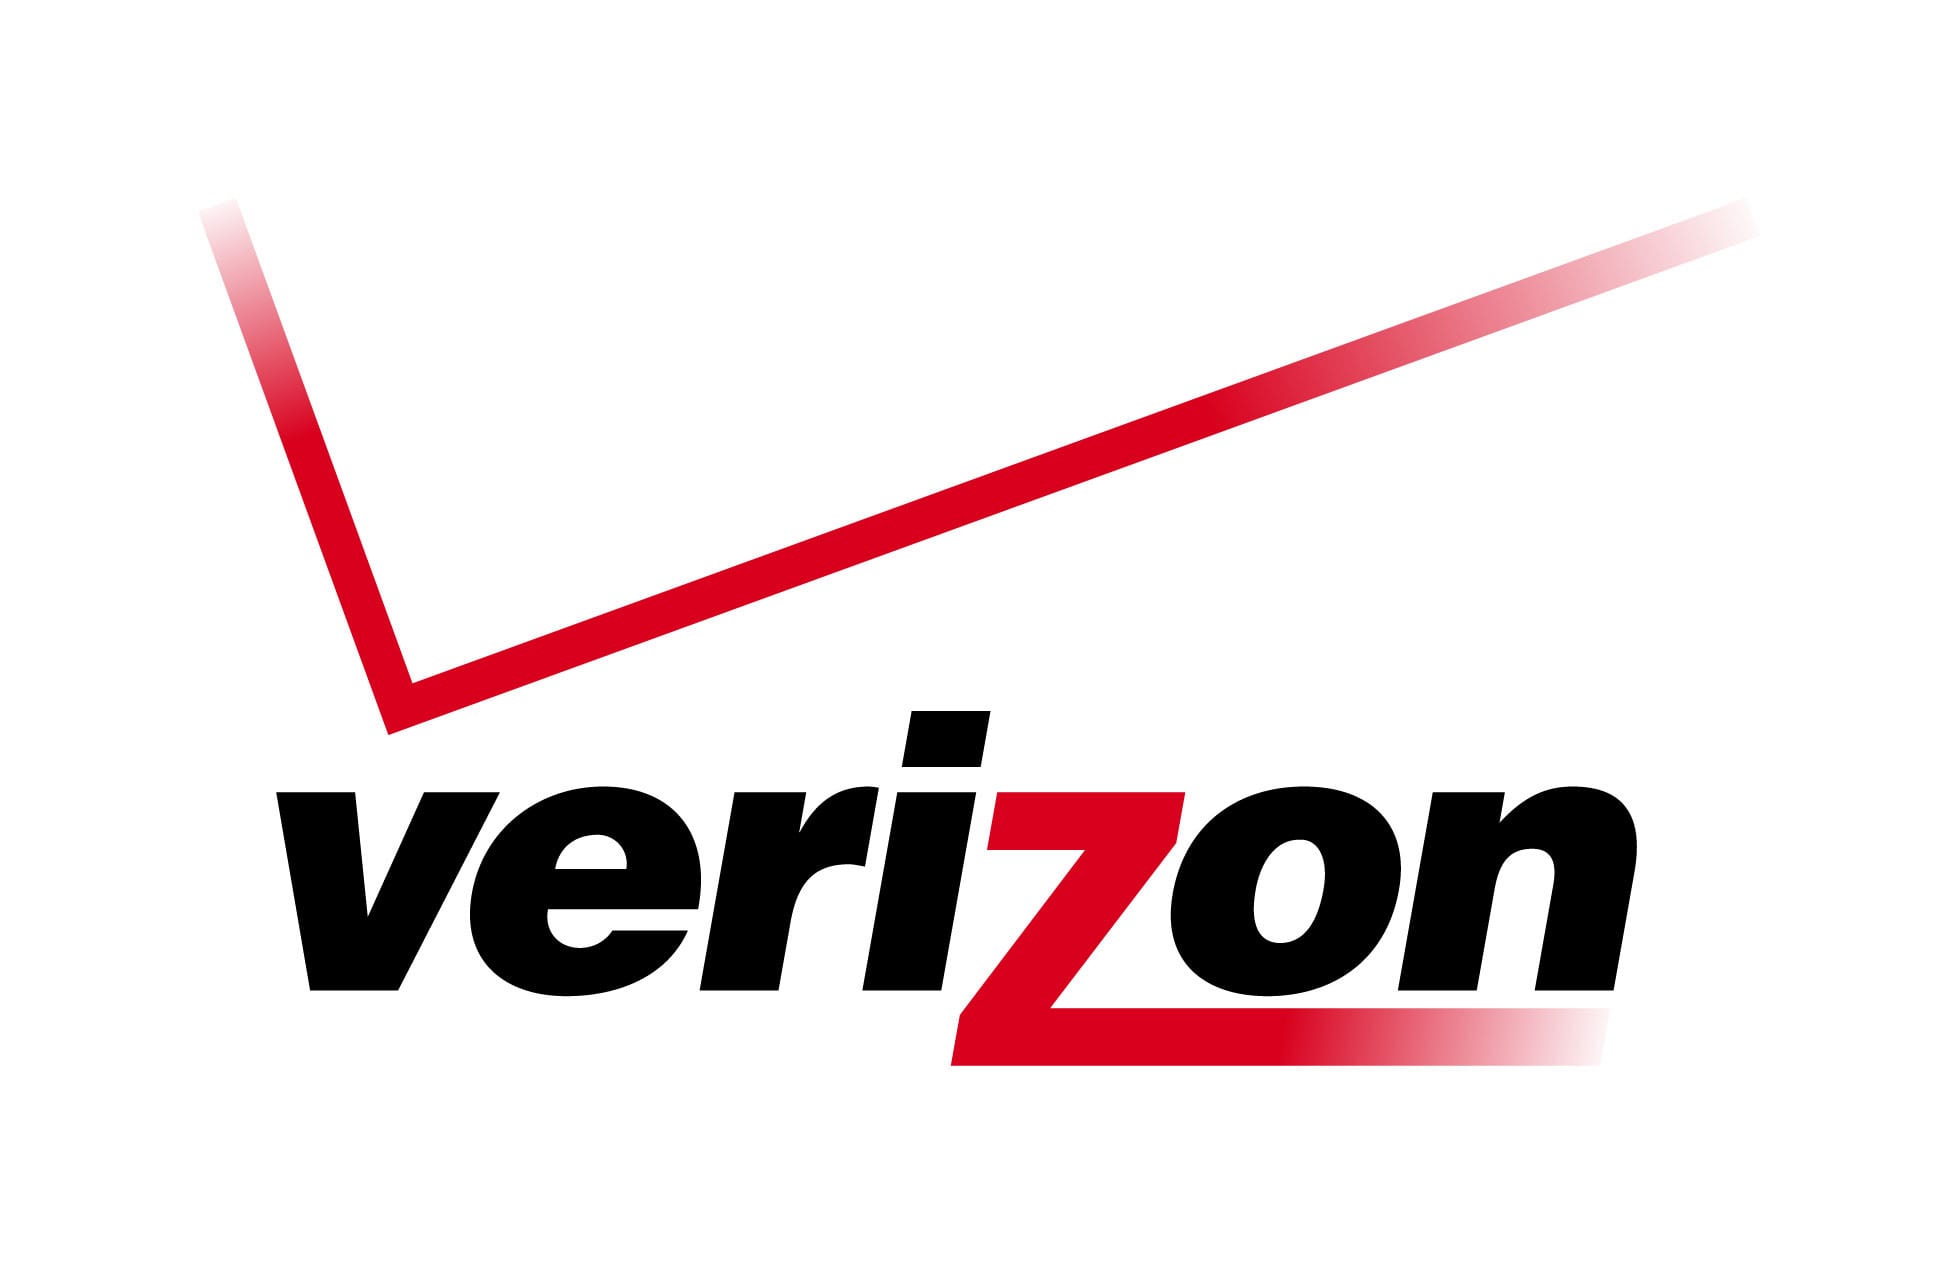 Verizon officially launched 5G commercial